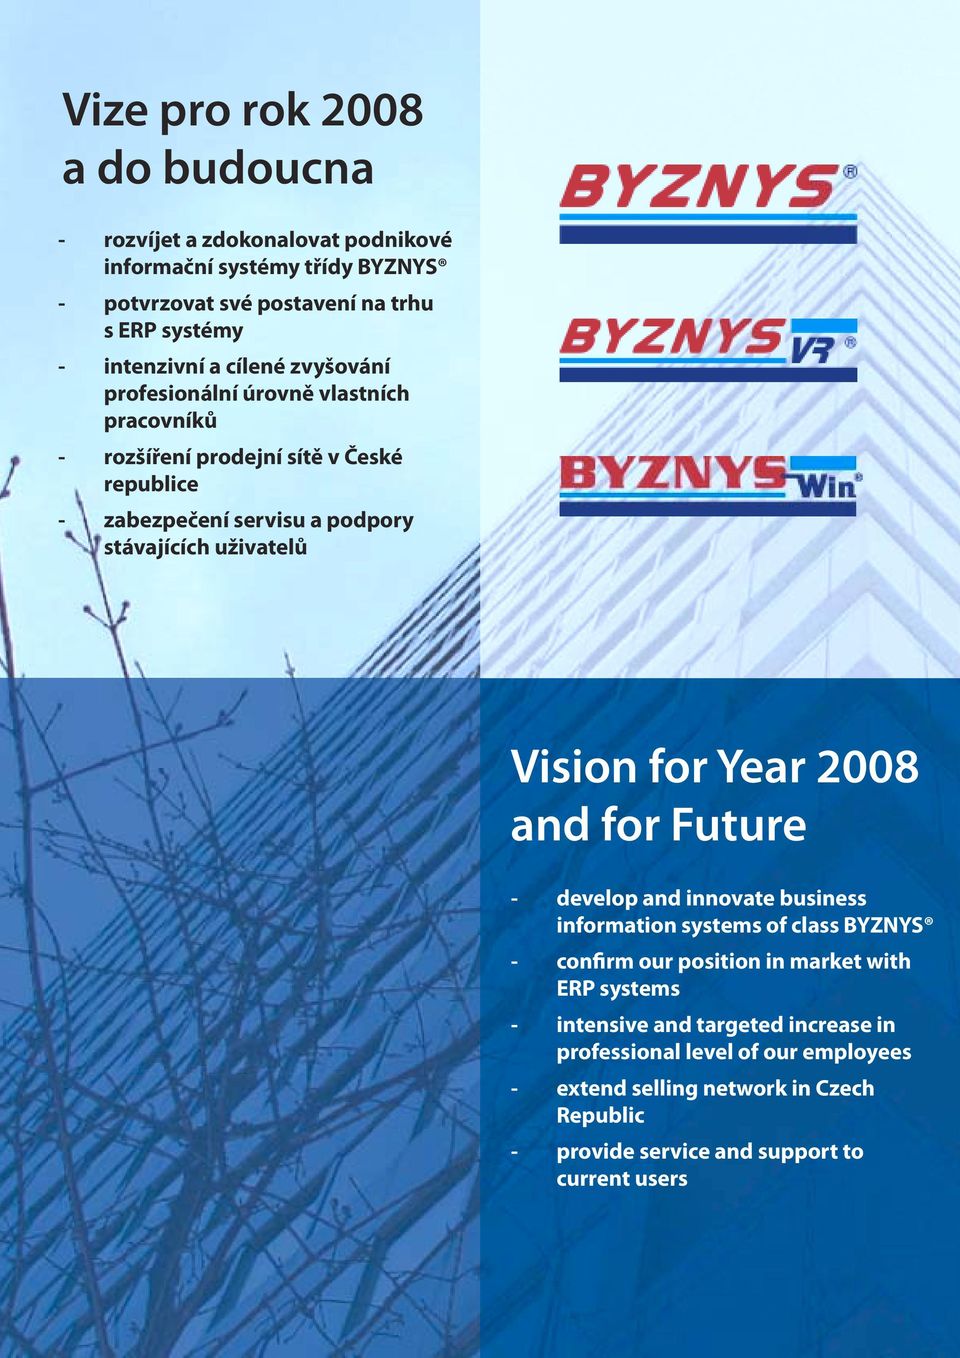 uživatelů Vision for Year 2008 and for Future - develop and innovate business information systems of class BYZNYS - confirm our position in market with ERP